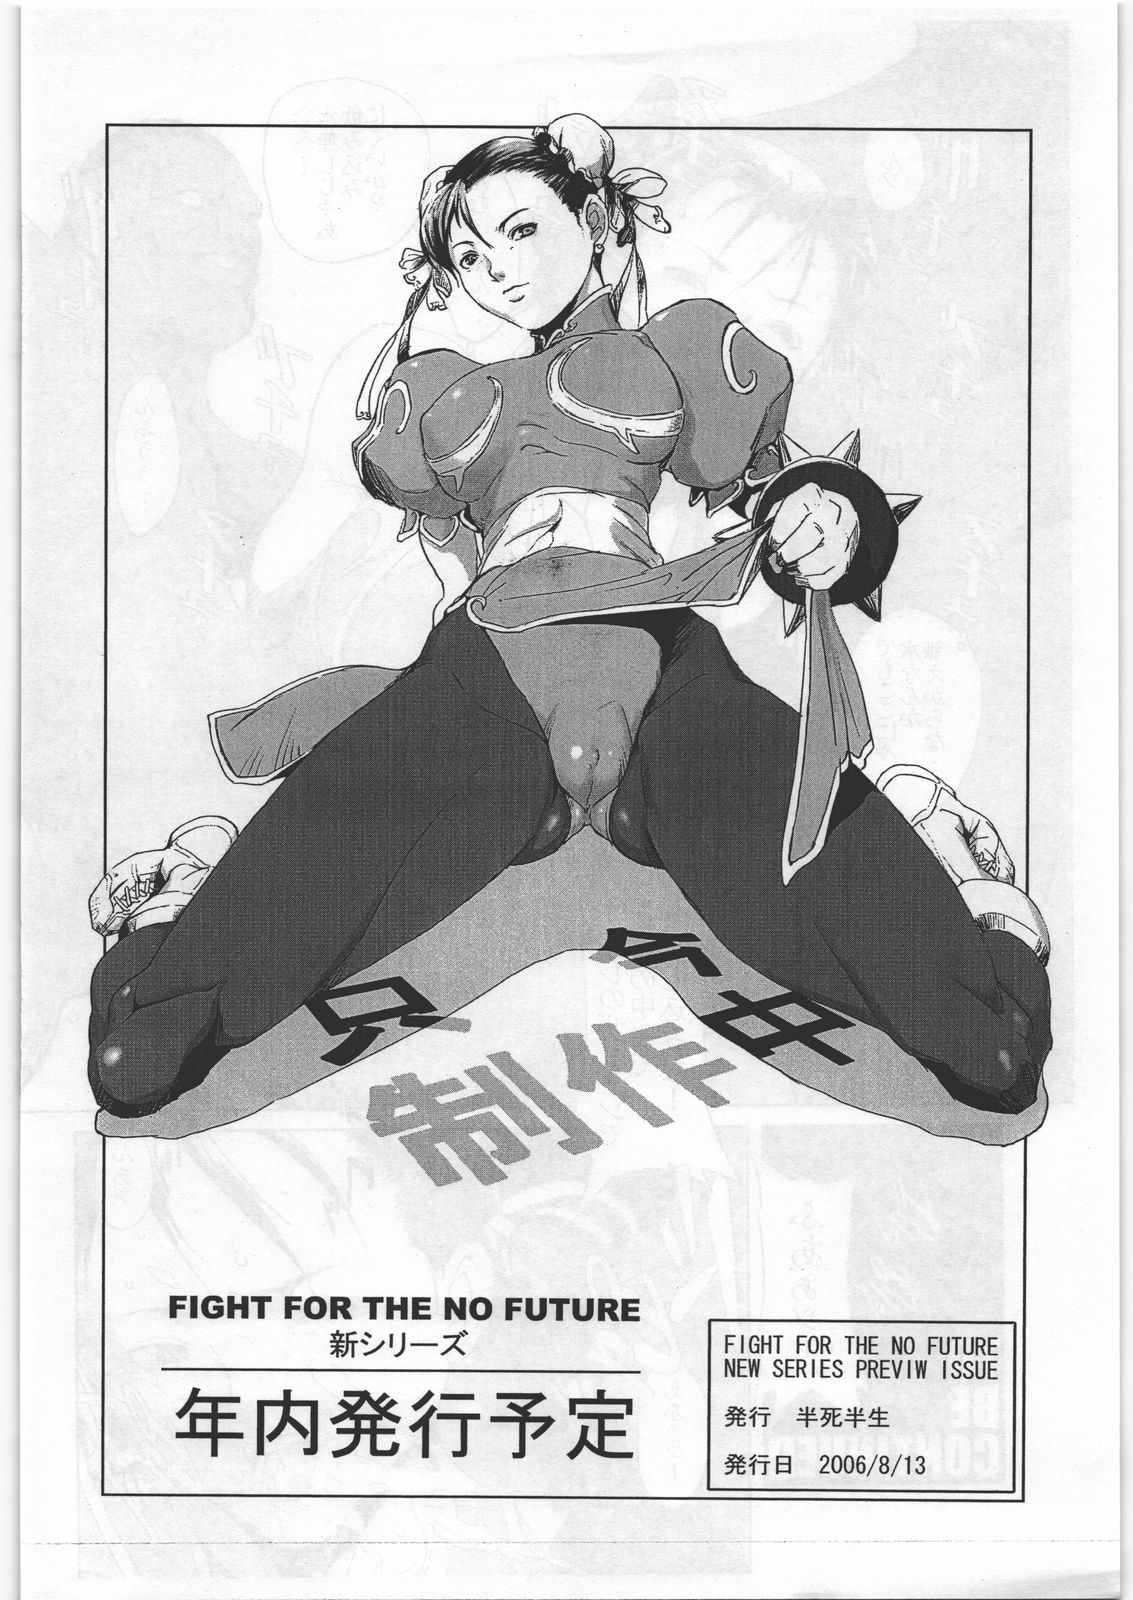 (C70) [Hanshihanshou (Noukyuu / Noukyu / Noq)] FIGHT FOR THE NO FUTURE NEW SERIES PREVIEW (Street Fighter) (C70) [半死半生 (のうきゅう)] FIGHT FOR THE NO FUTURE NEW SERIES PREVIEW (ストリートファイター)